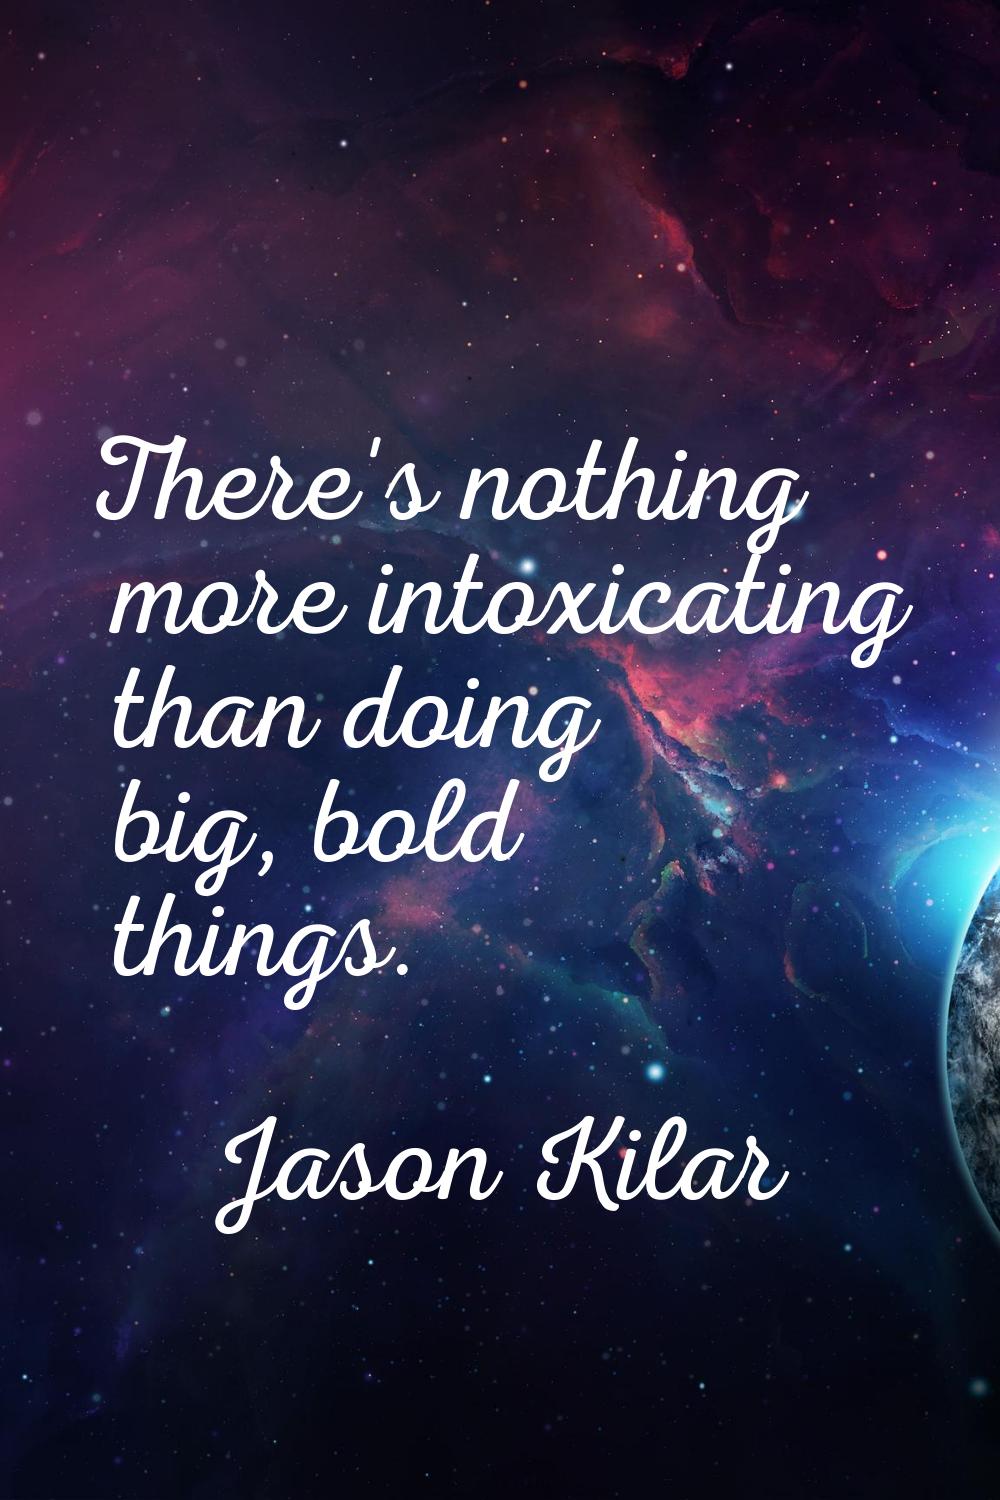 There's nothing more intoxicating than doing big, bold things.